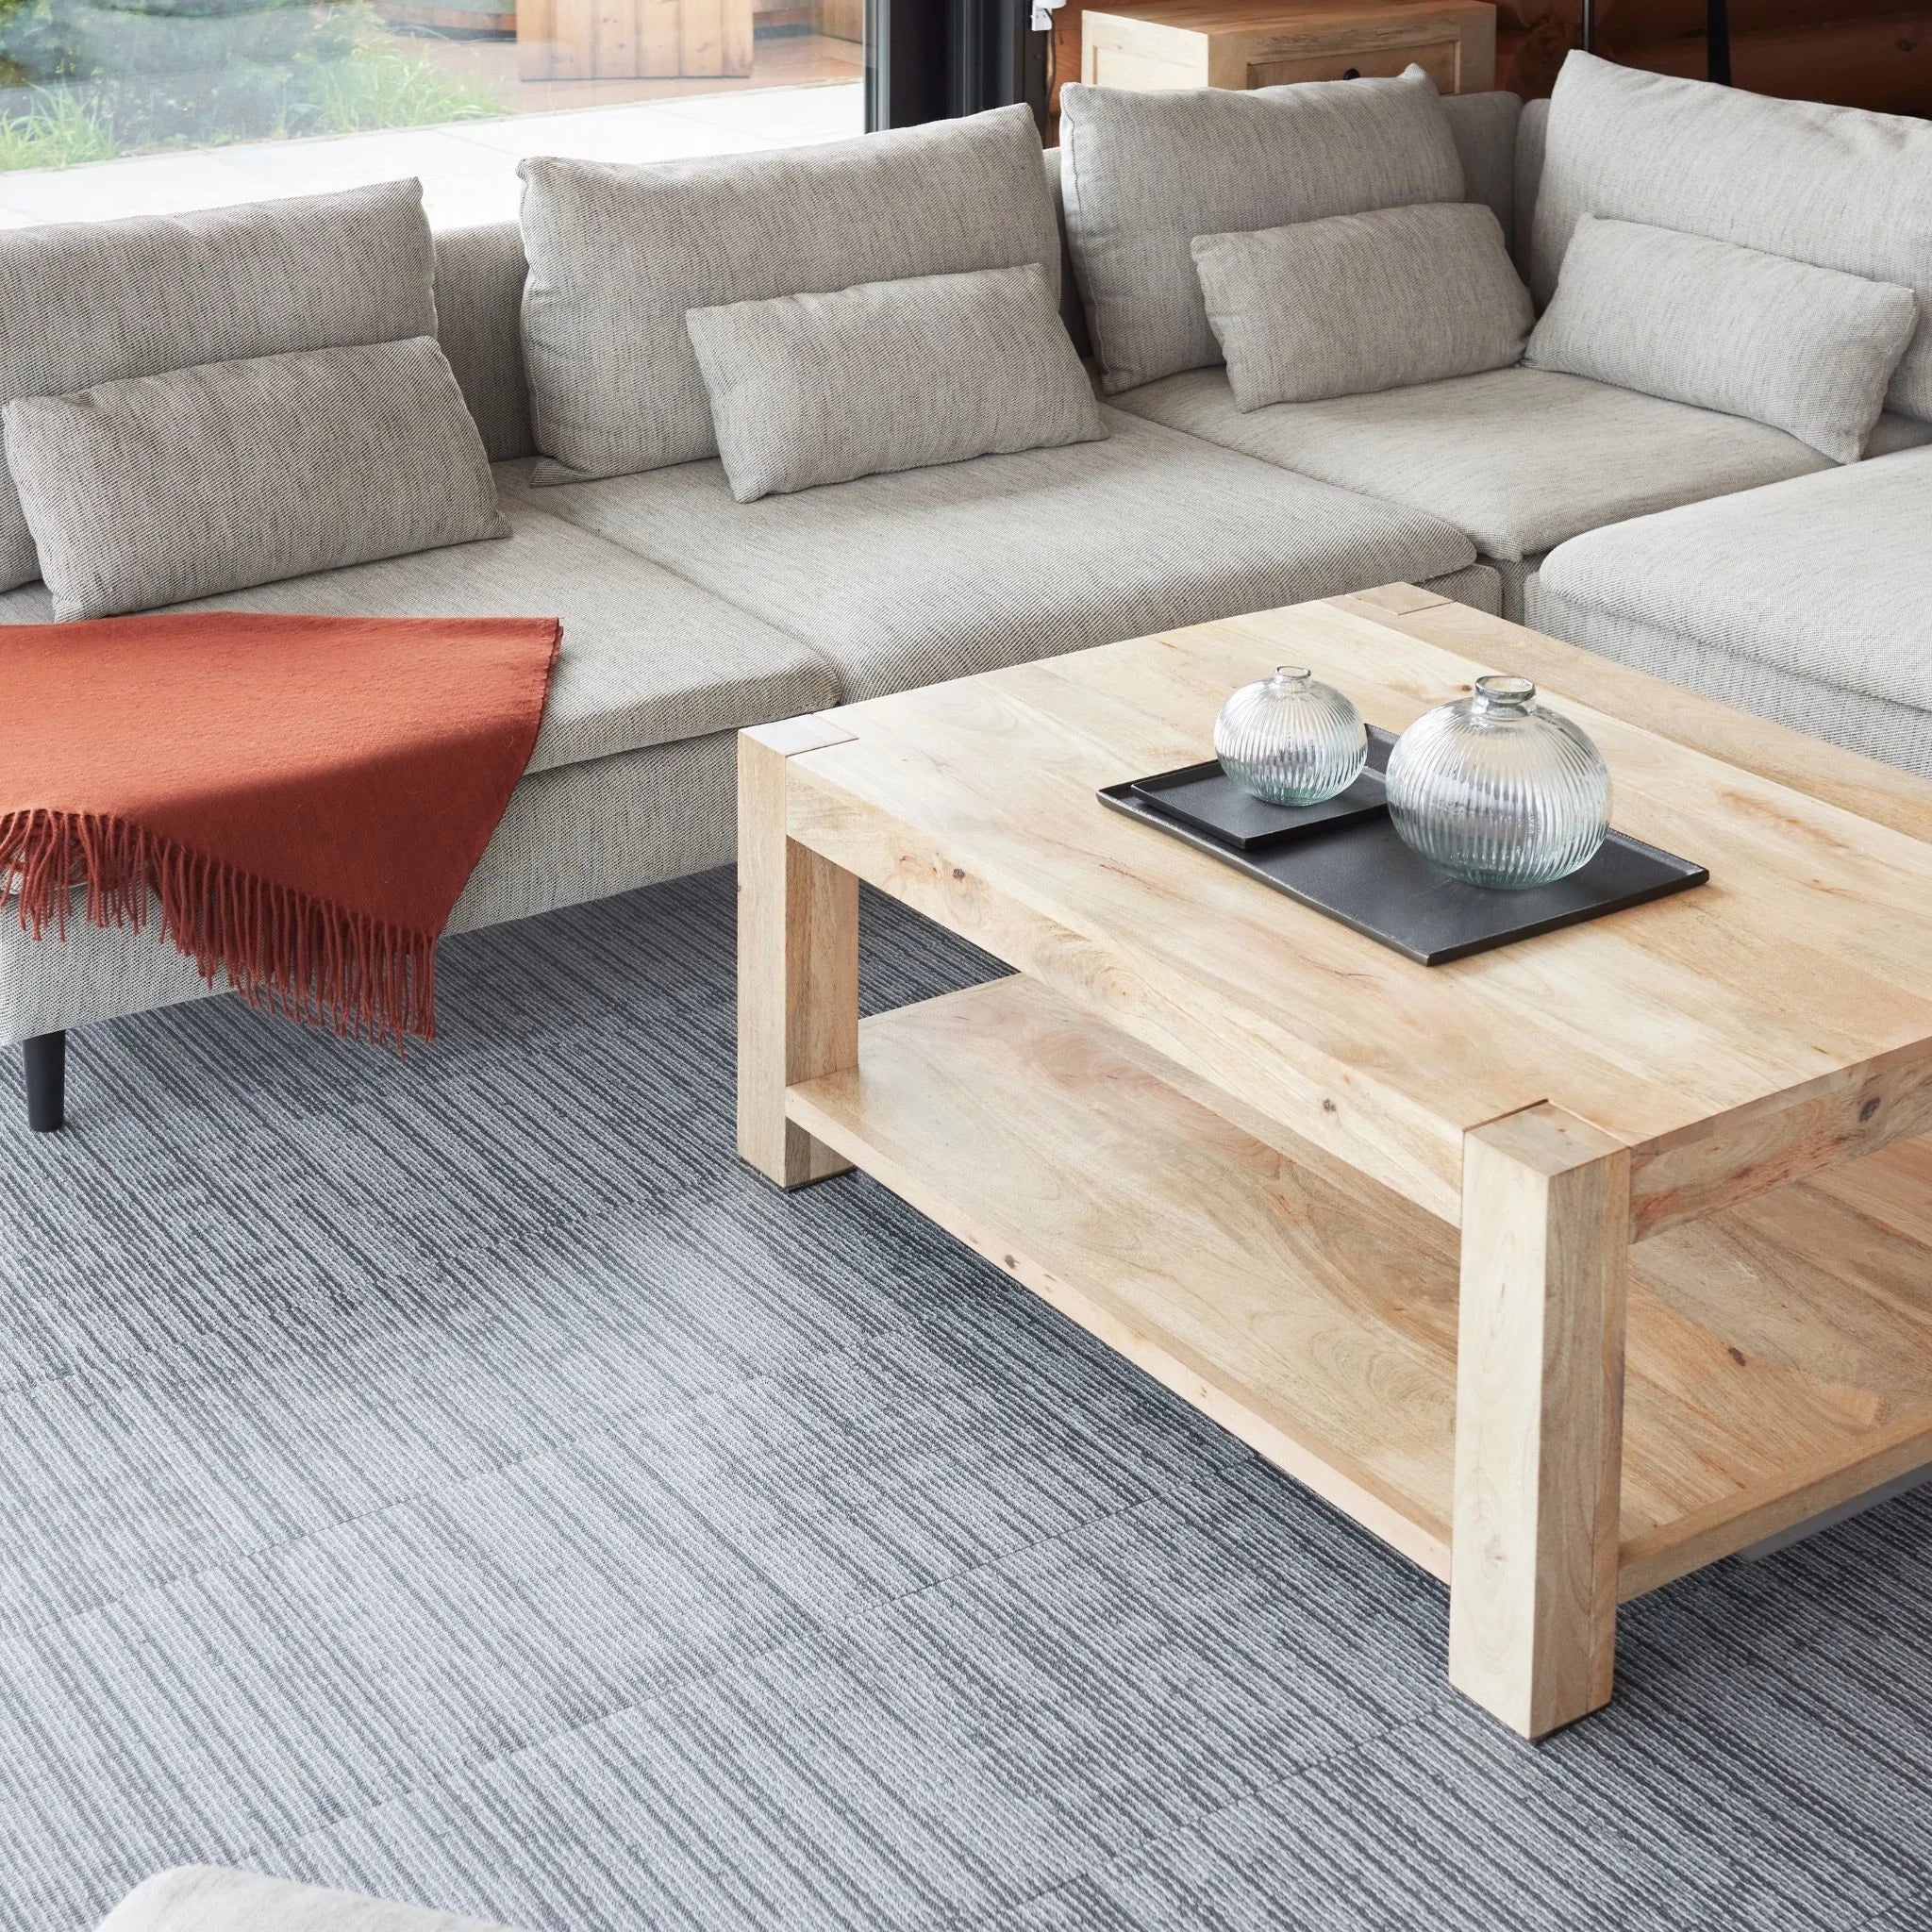 living room with grey textured carpet, beige sofa, and wooden coffee table